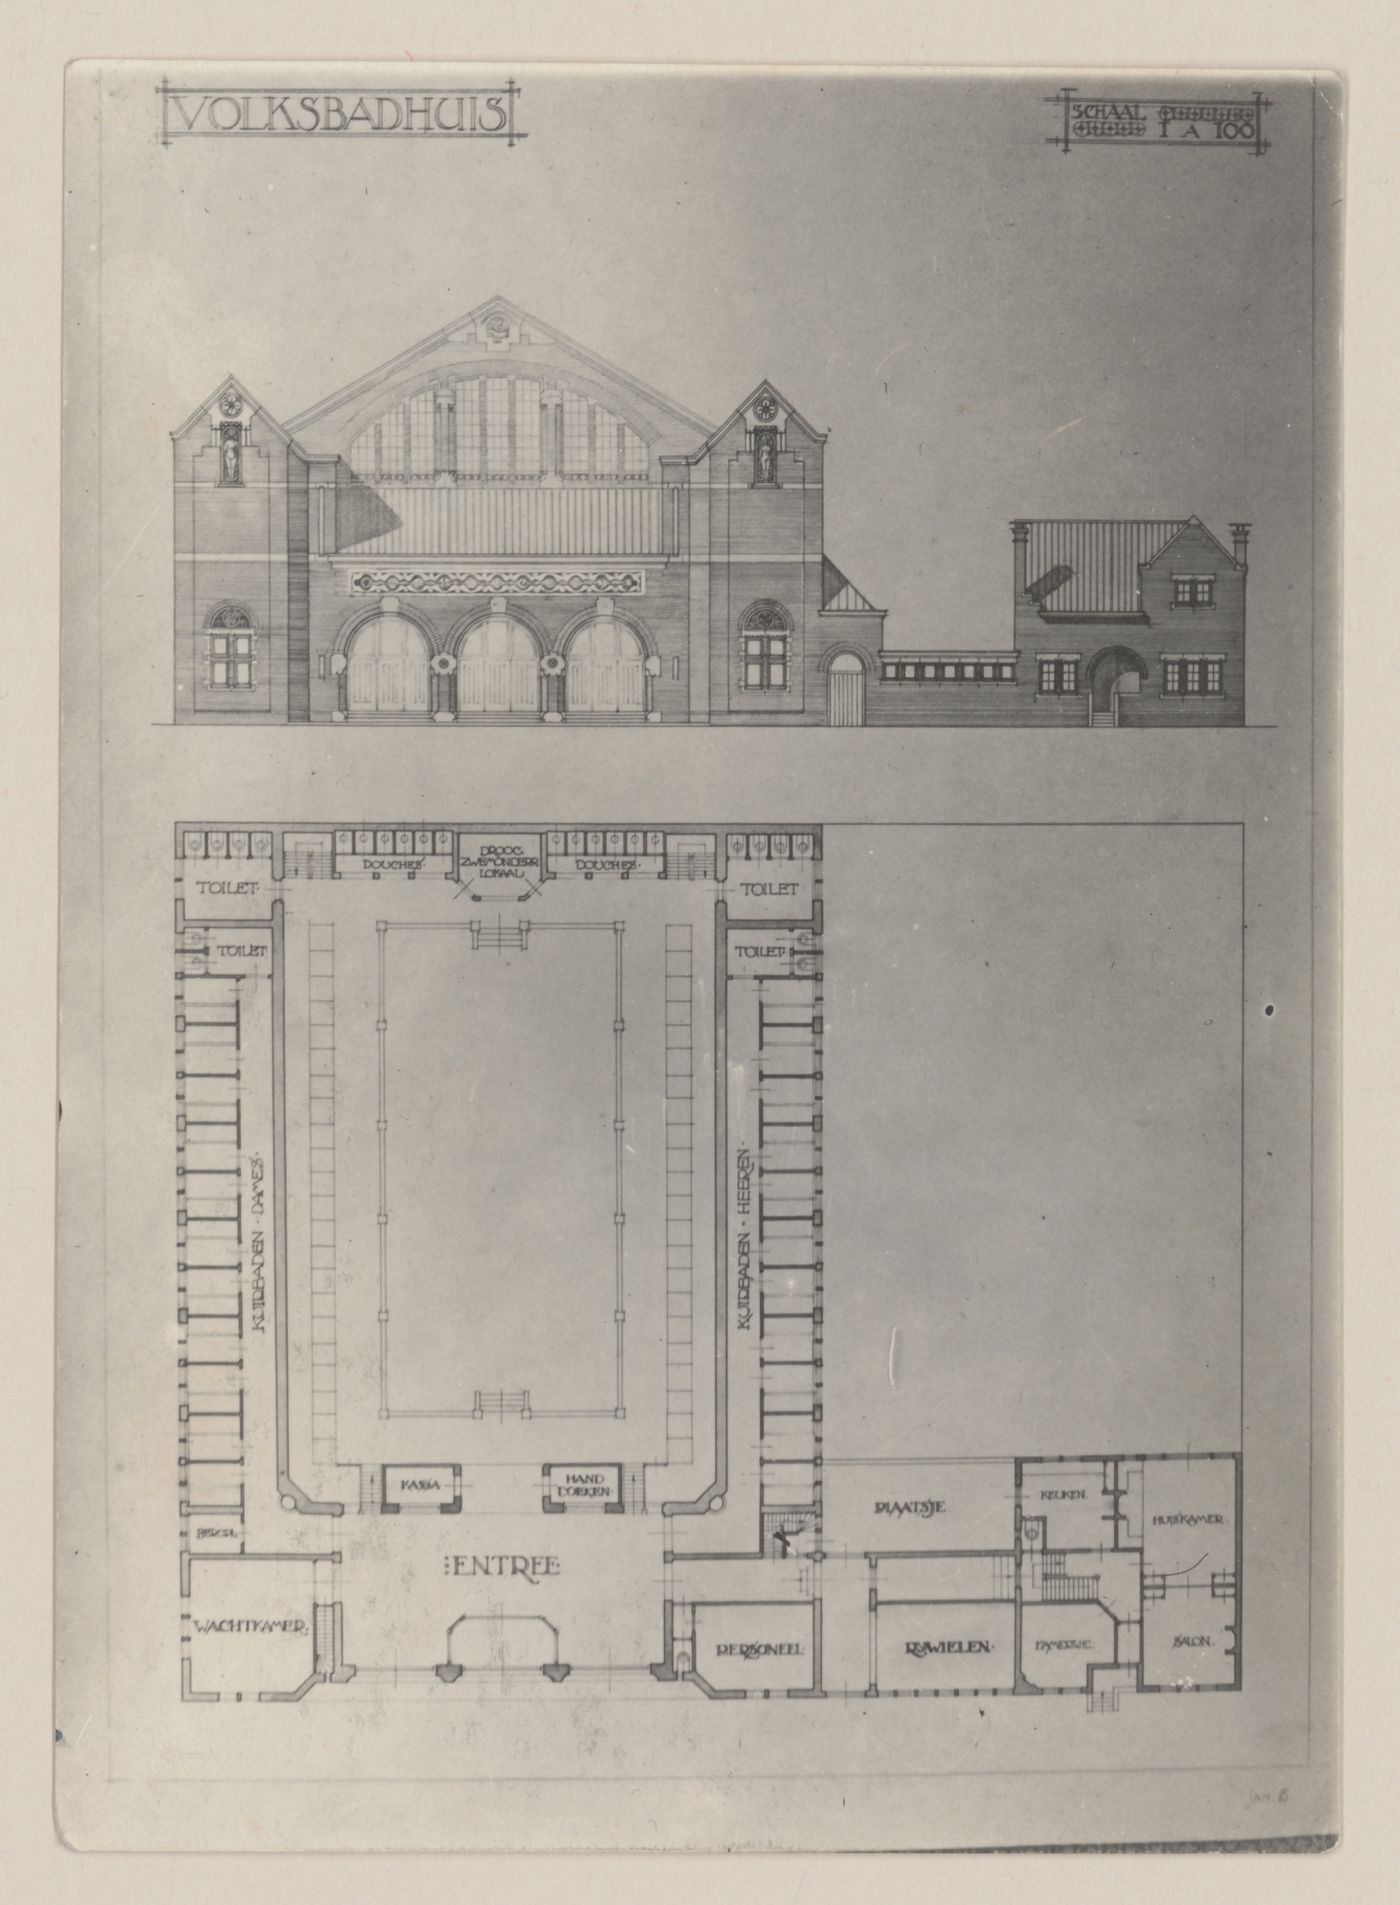 Photograph of an elevation and floor plan for a public bath, Blaricum, Netherlands